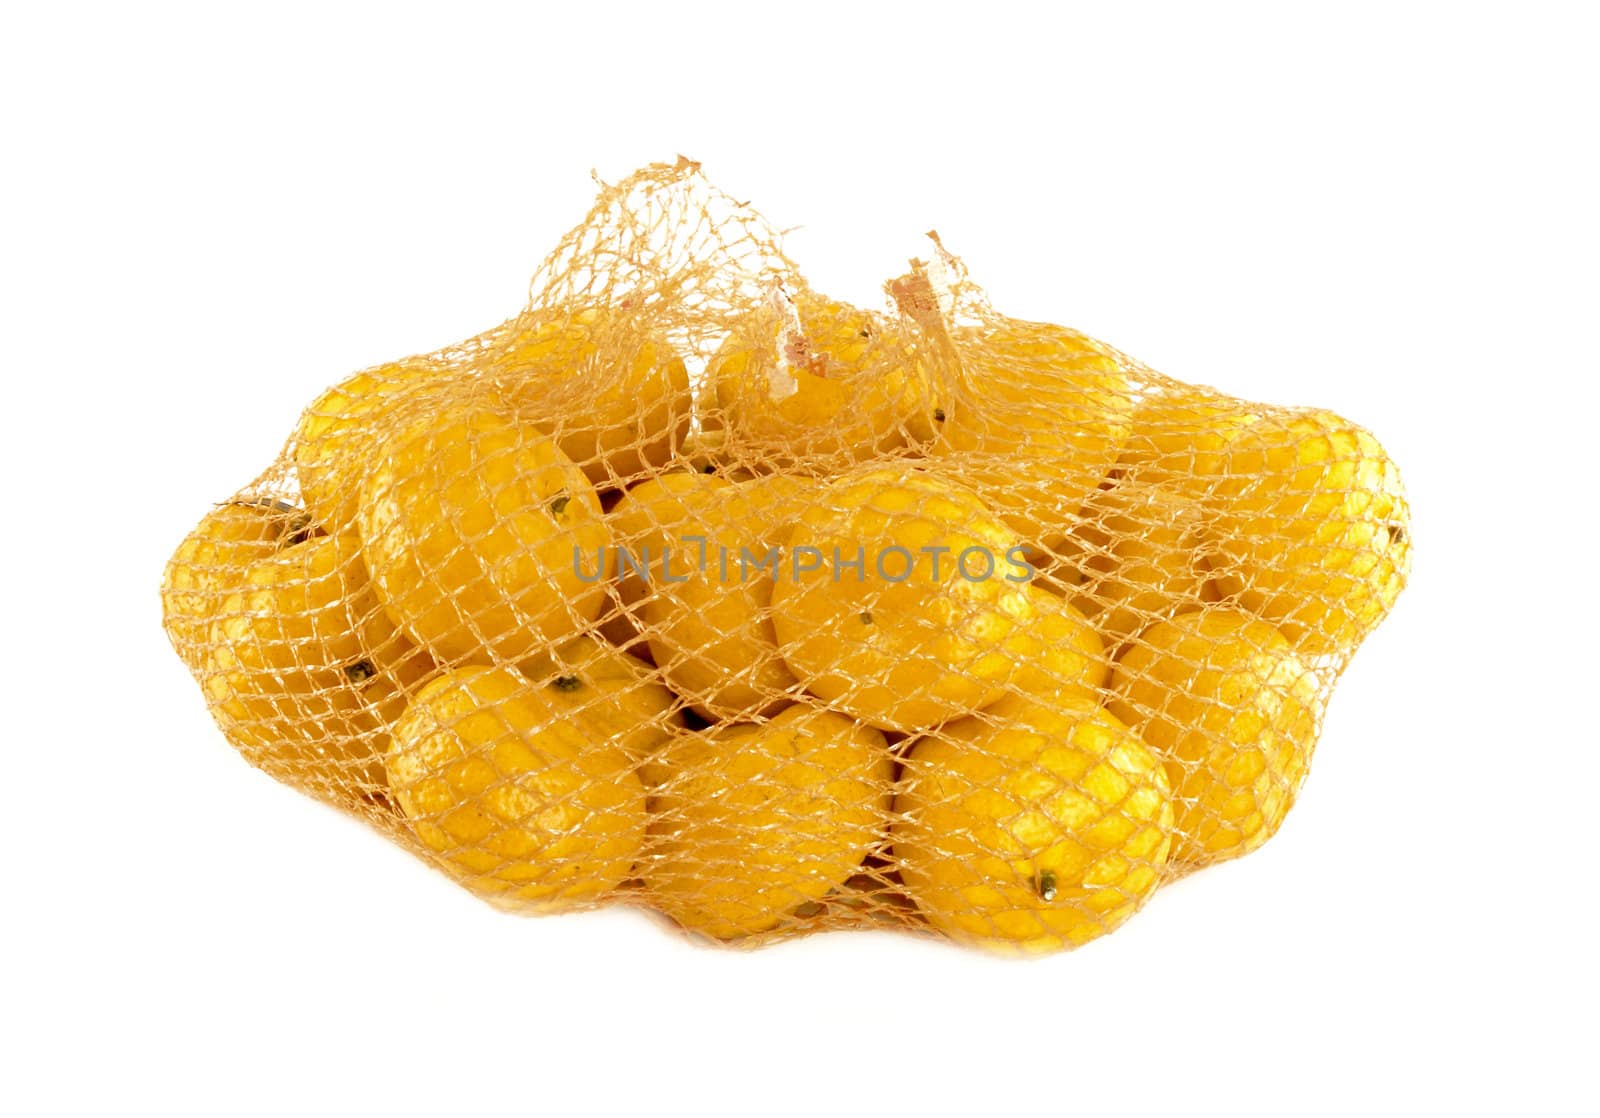 A bunch of oranges packaged in netting, isolated on white by geargodz